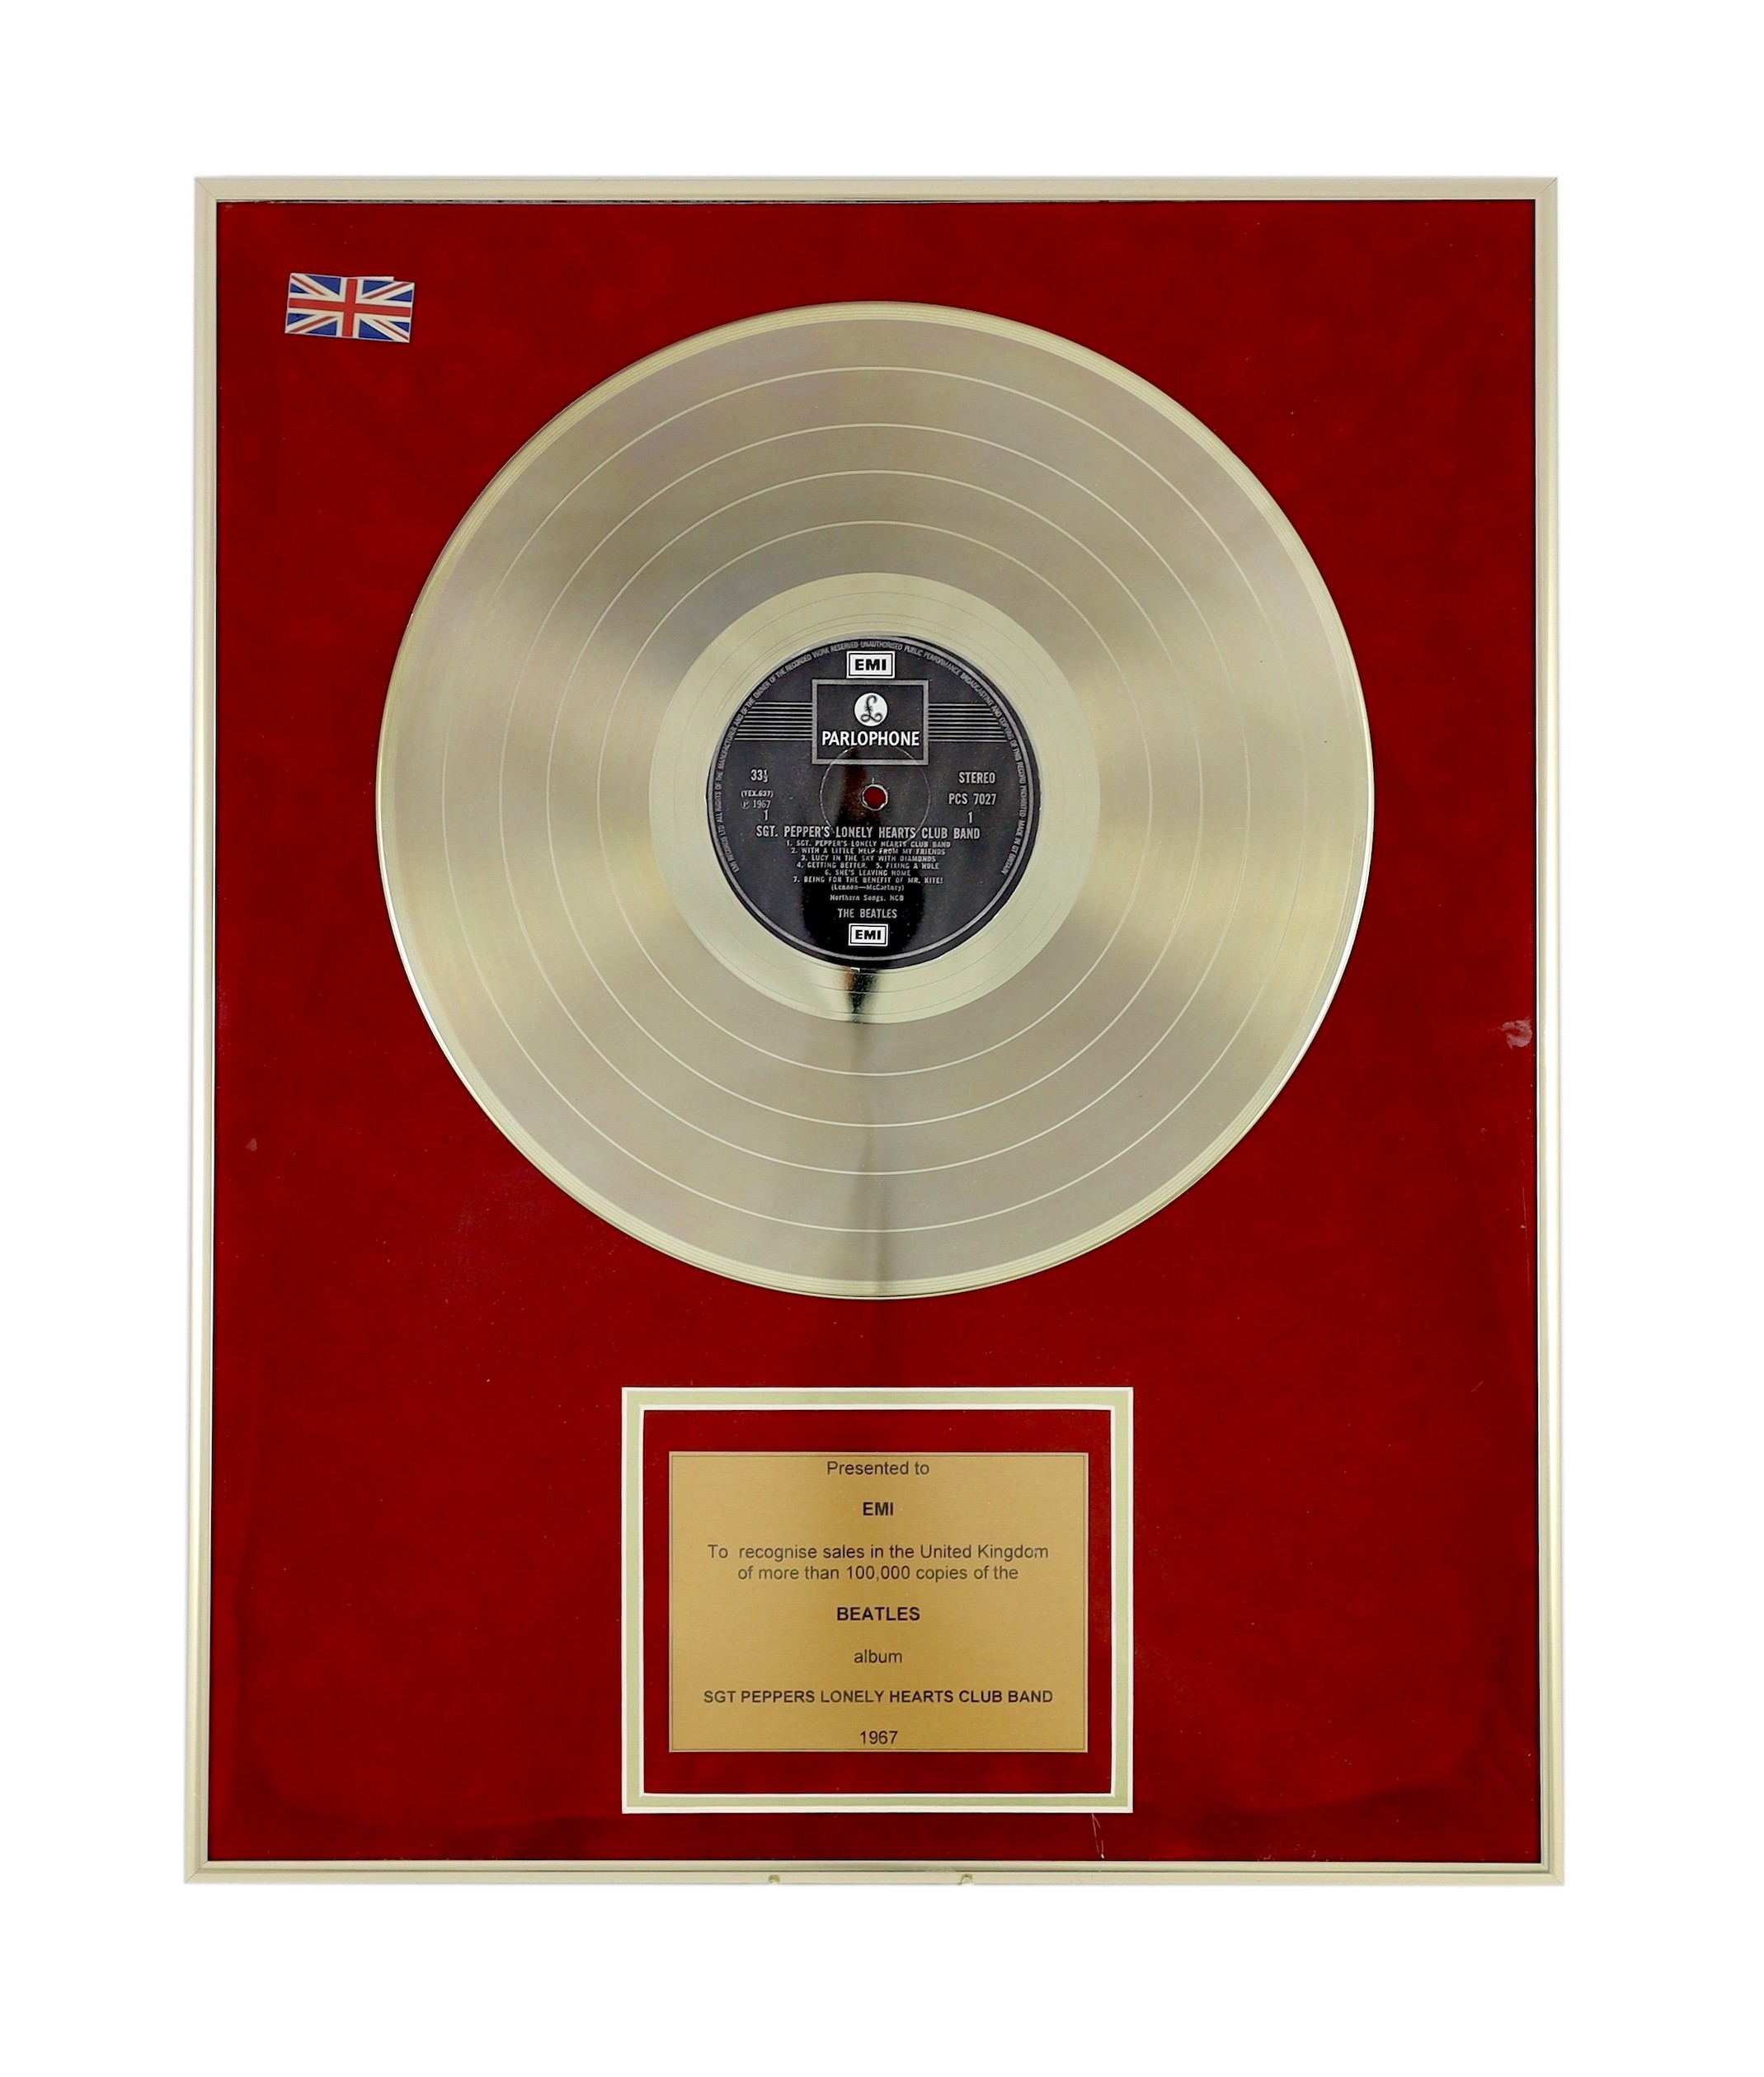 Sgt. Peppers Lonely Hearts Club Band, a framed gold disc, presented to EMI to recognise sales in the United Kingdom, of more than 100,000 copies, frame 41 x 50cm